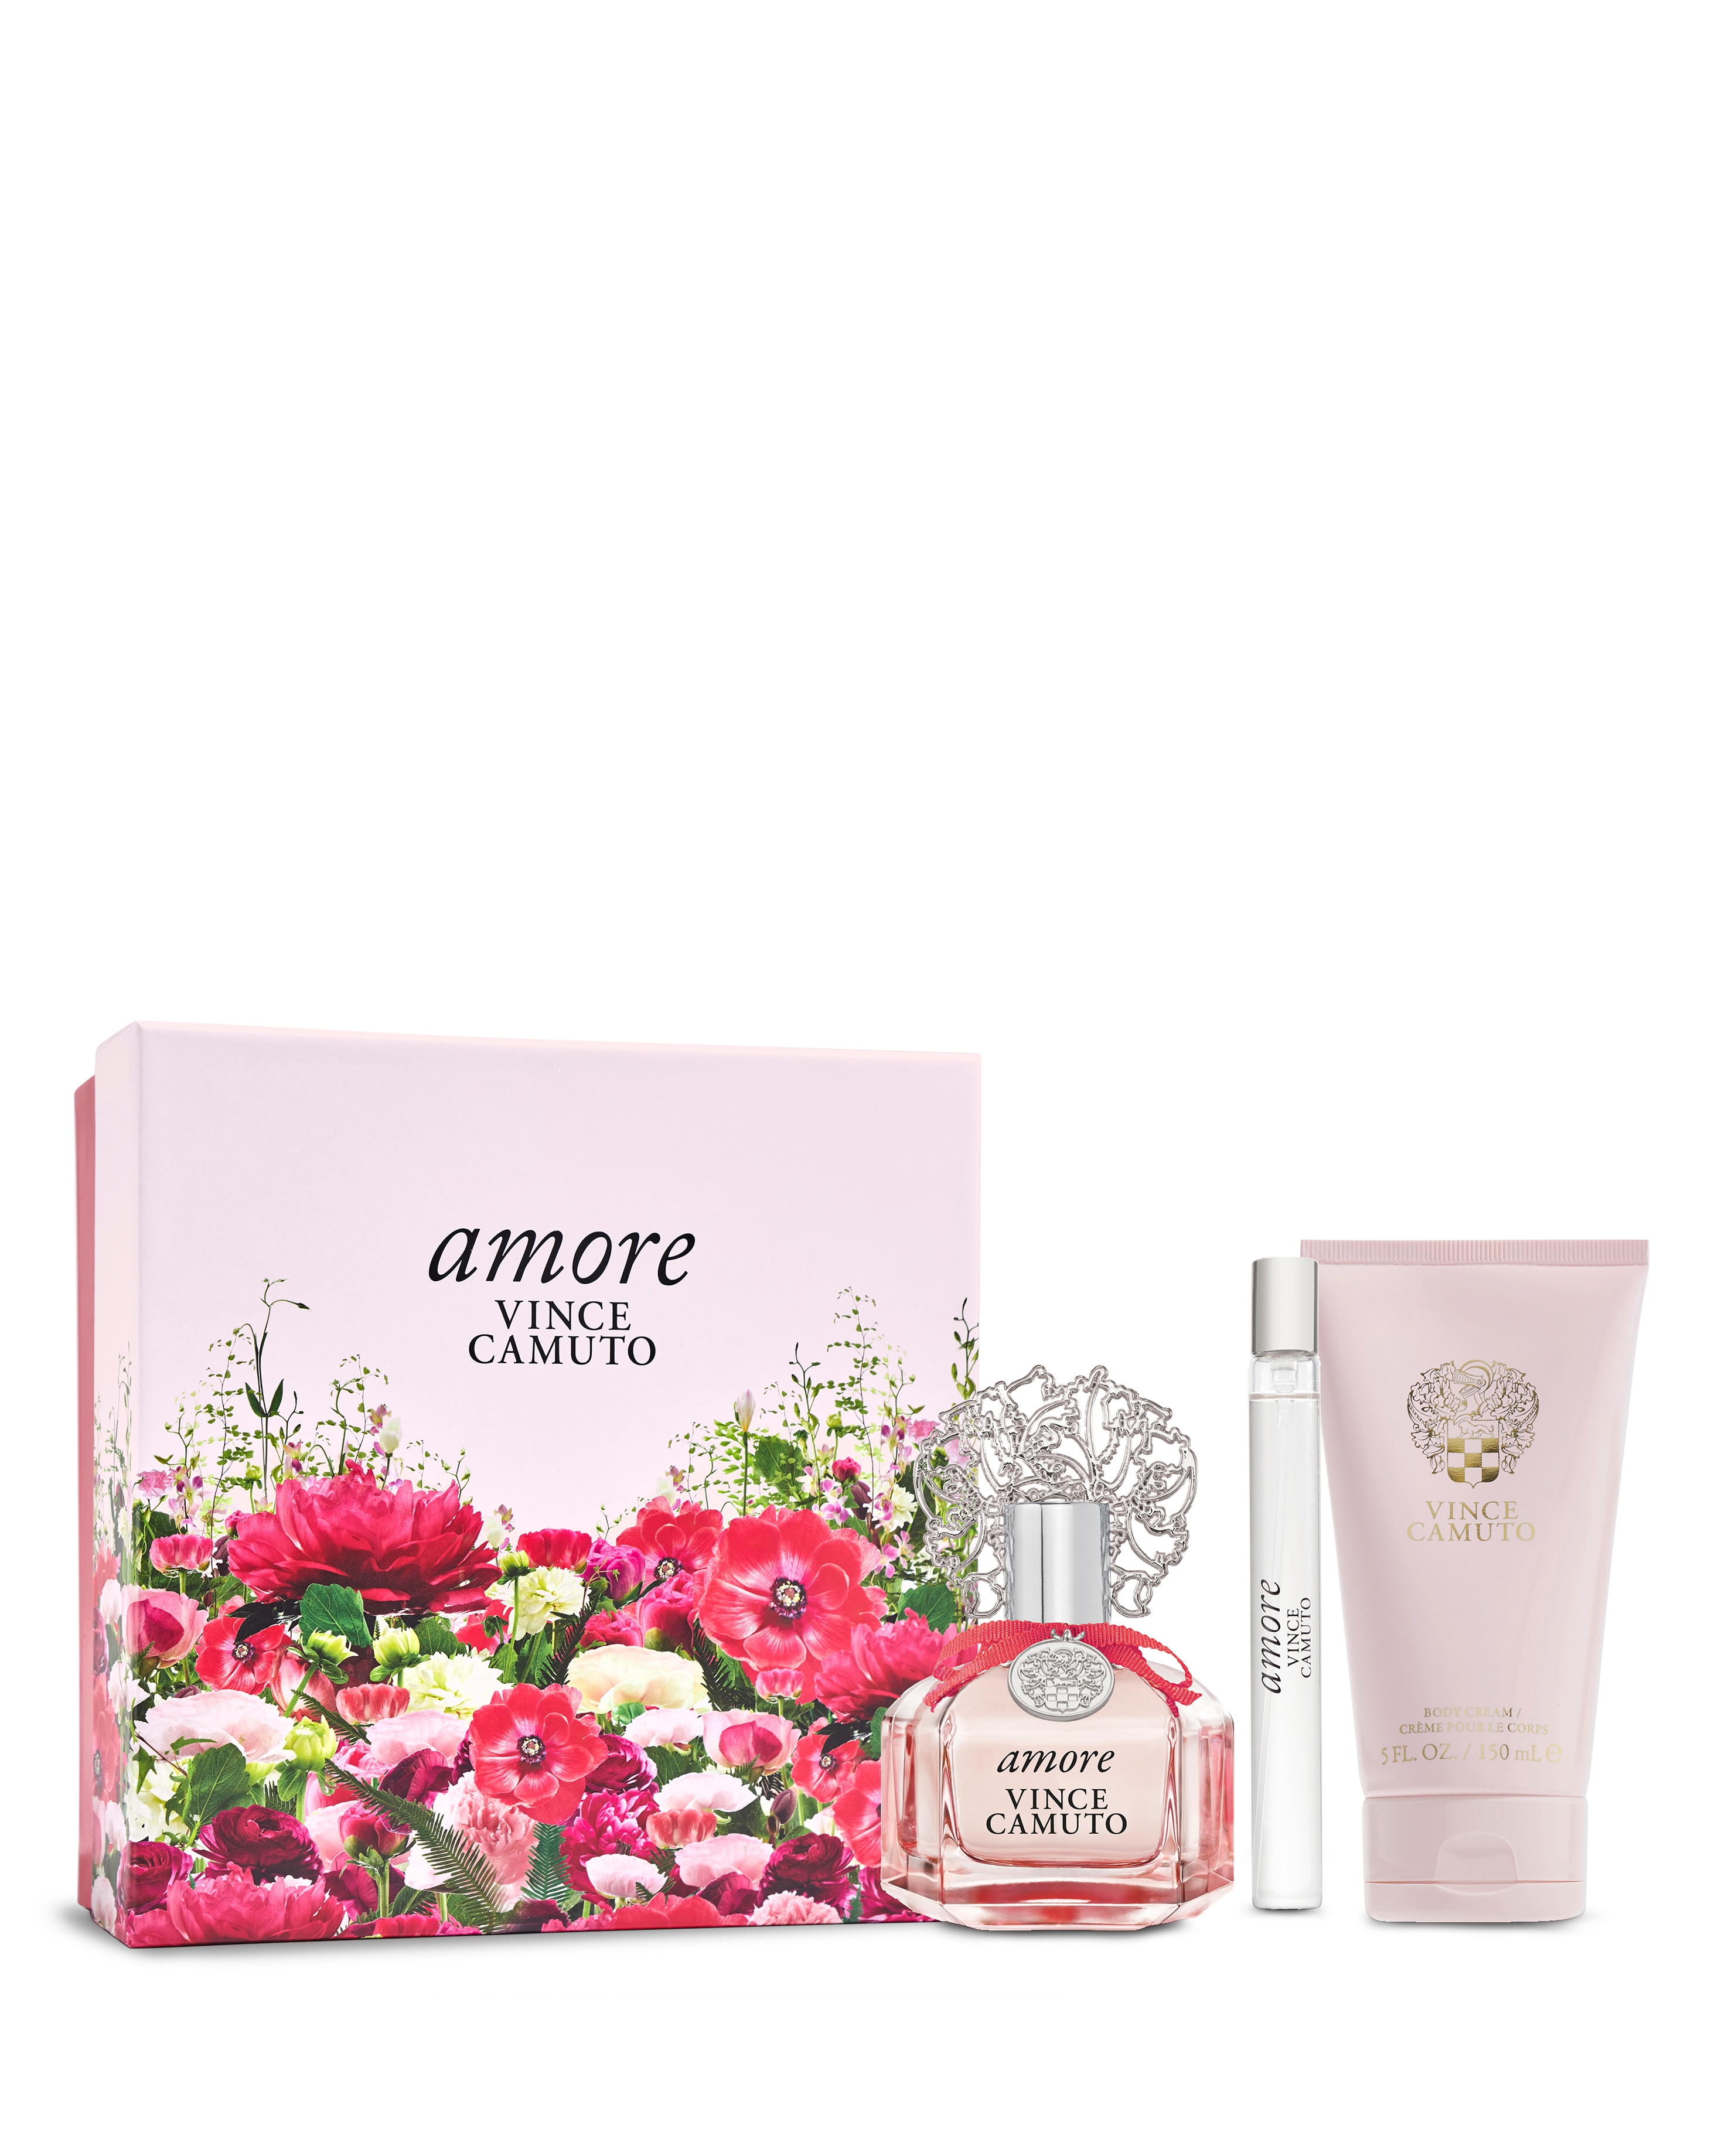 Vince Camuto Amore Women Parfum Spray 3.4 oz New In Box